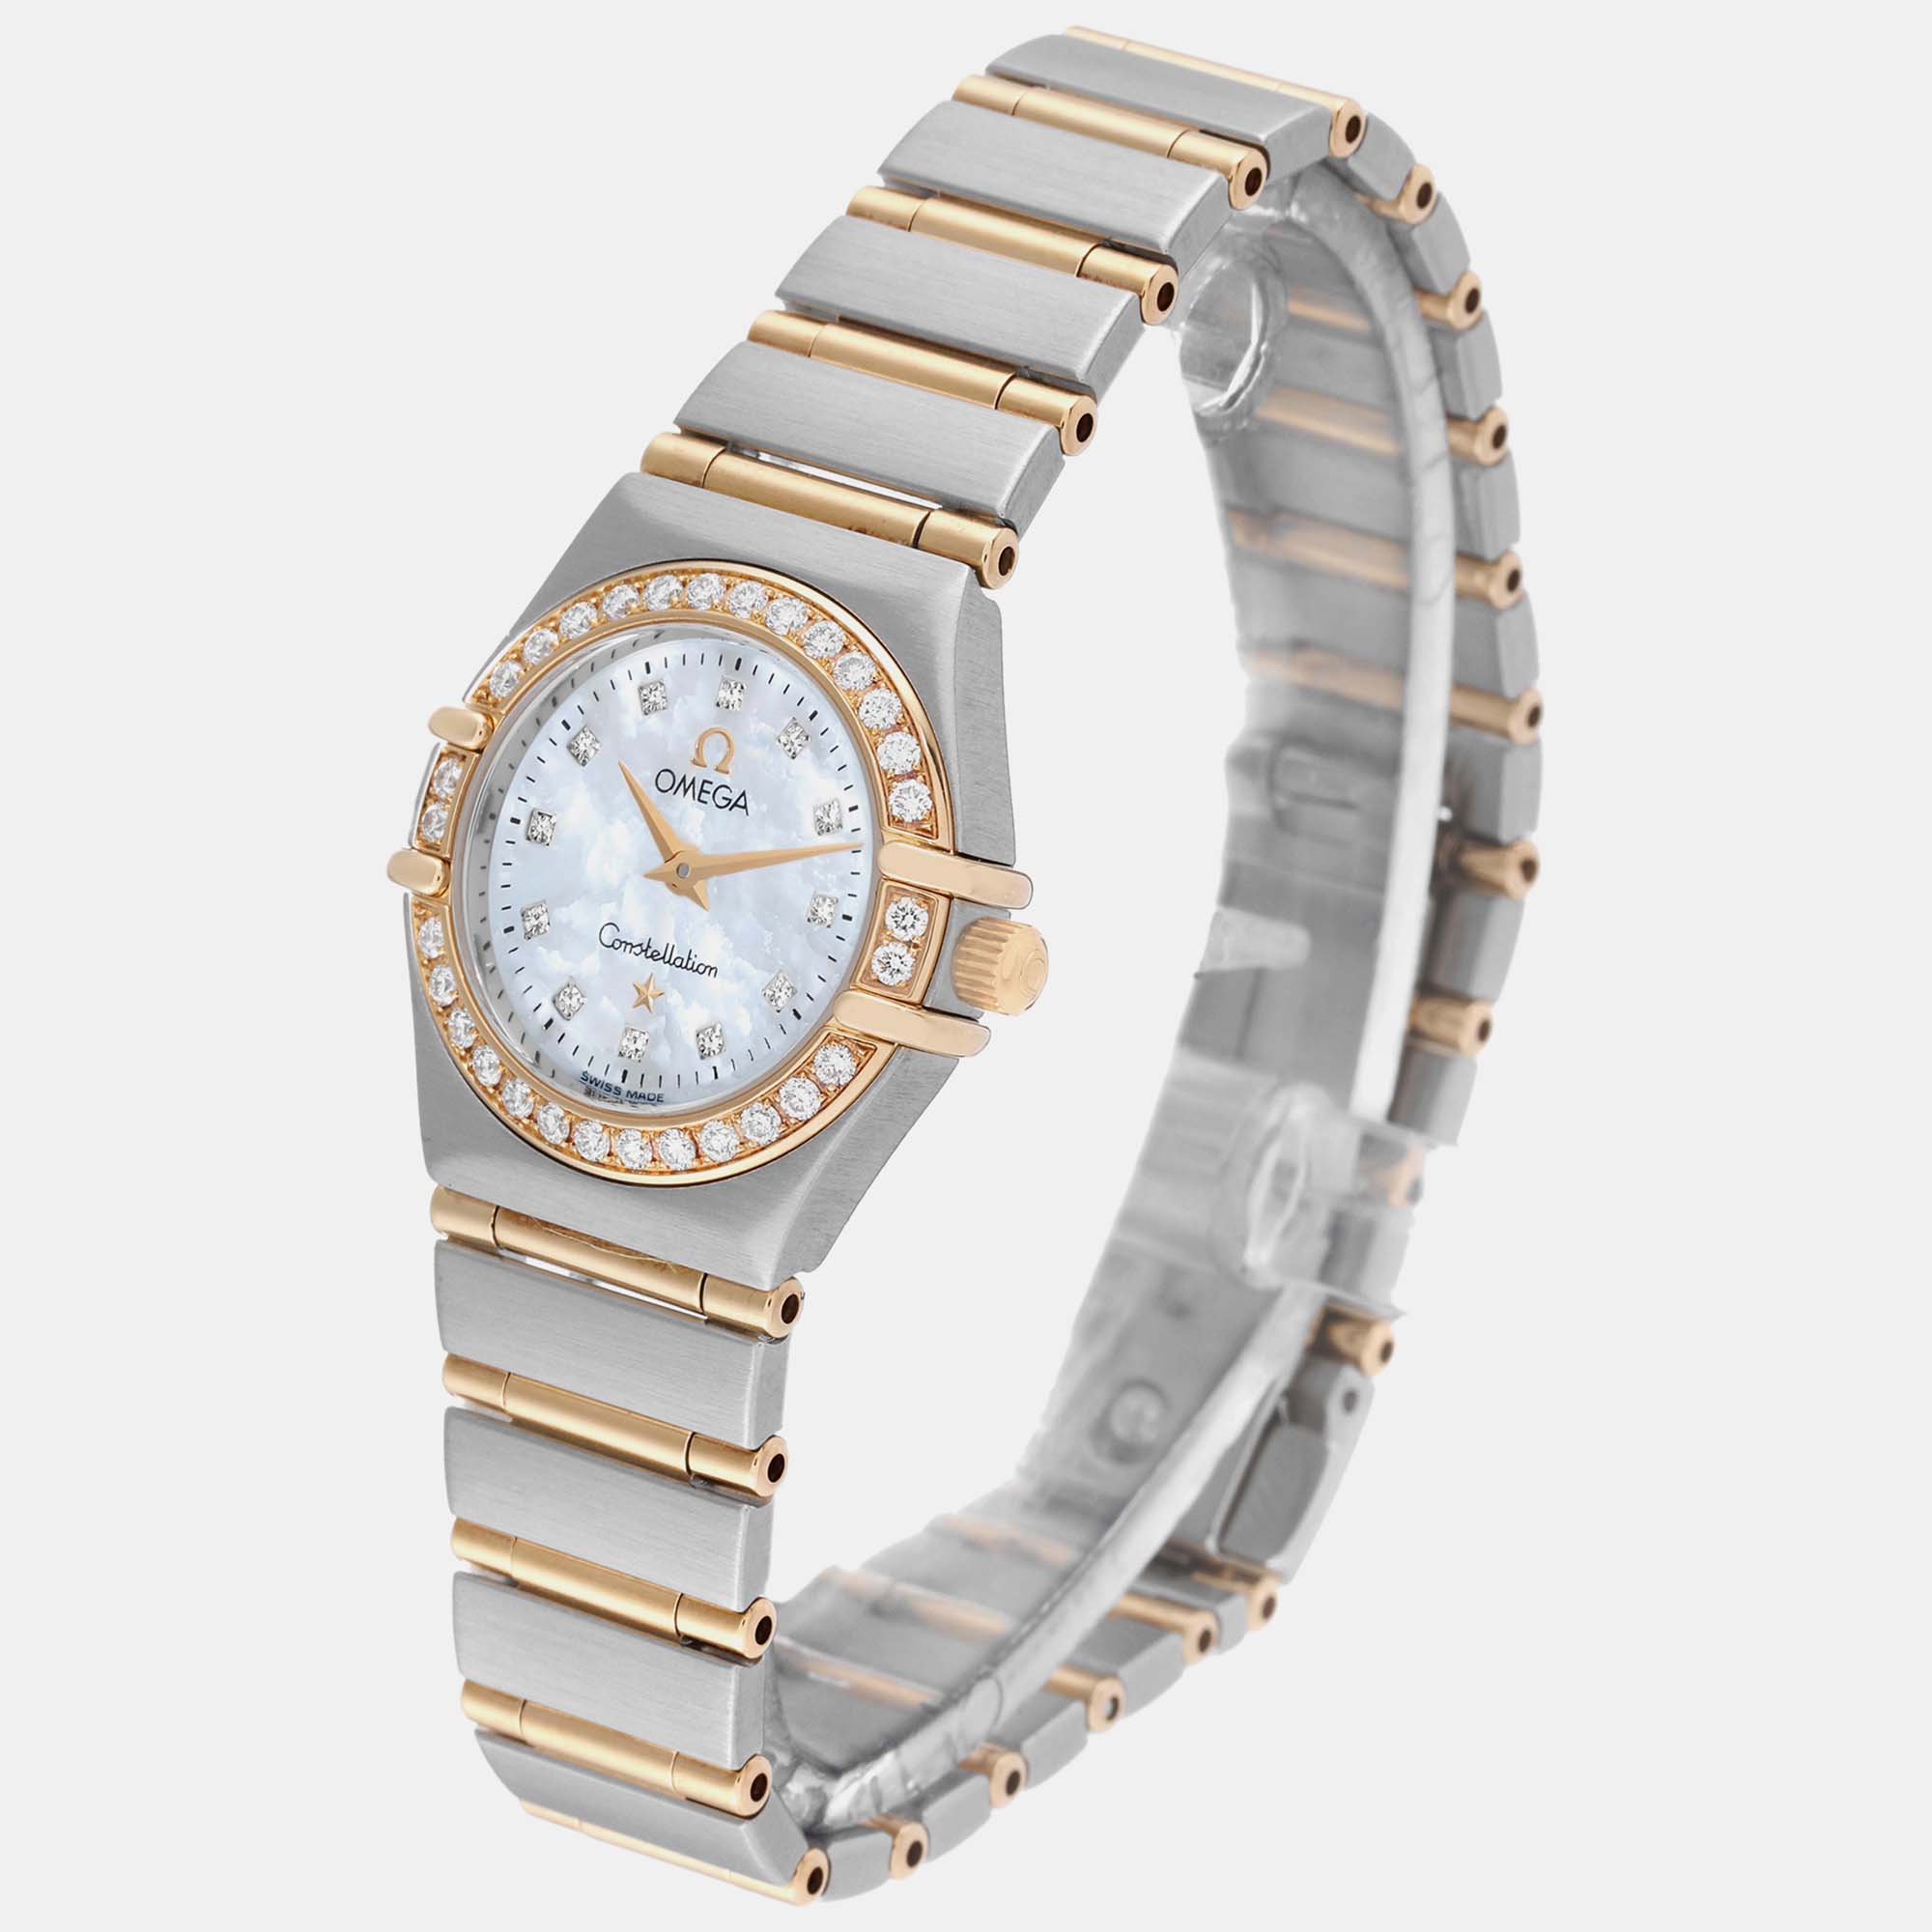 Omega Mother Of Pearl Diamond 18k Yellow Gold And Stainless Steel Constellation 1267.75.00 Quartz Women's Wristwatch 22.5 Mm